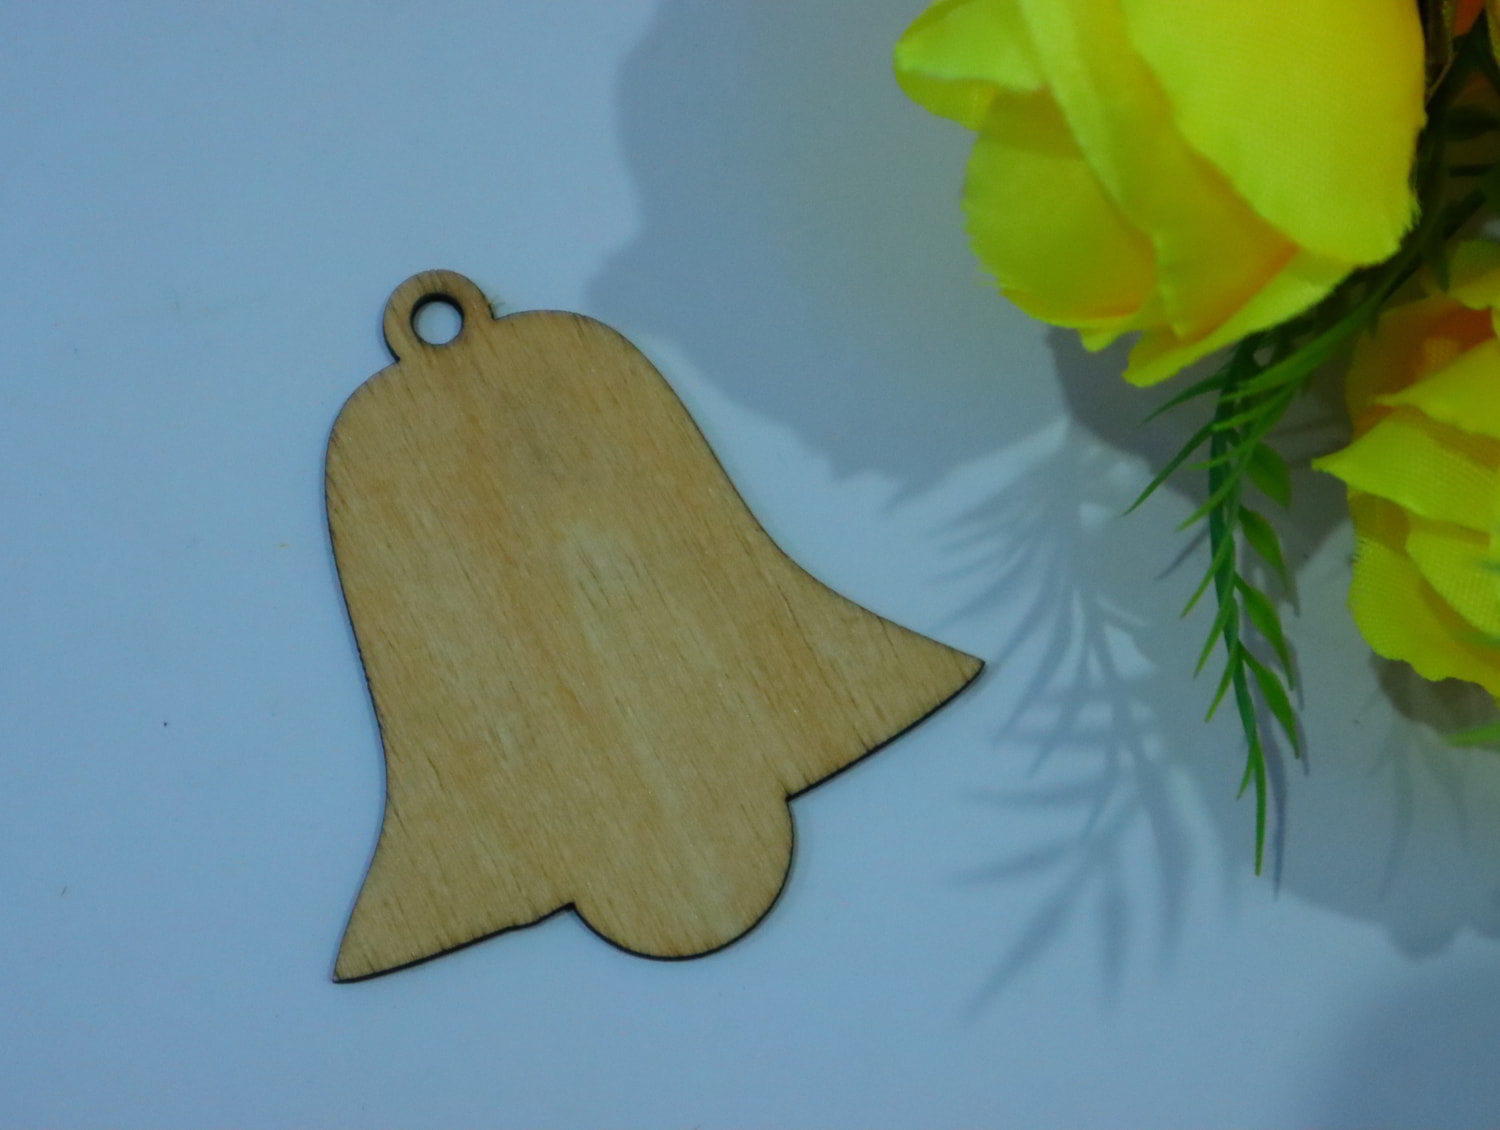 Laser Cut Wooden Christmas Bell Craft Blank Decoration Free Vector